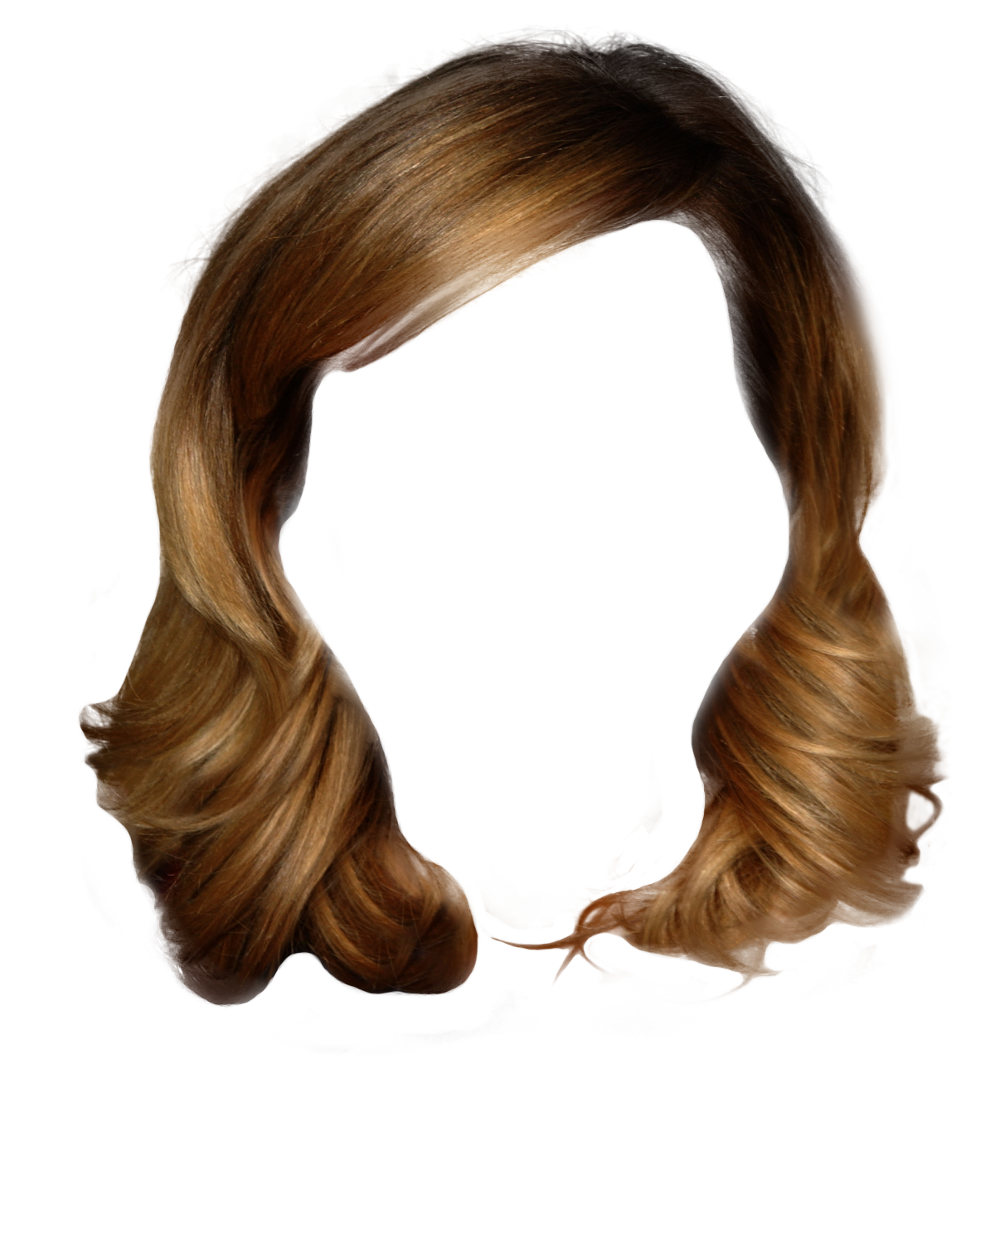 Hairstyles PNG Transparent Hairstyles.PNG Images. | PlusPNG